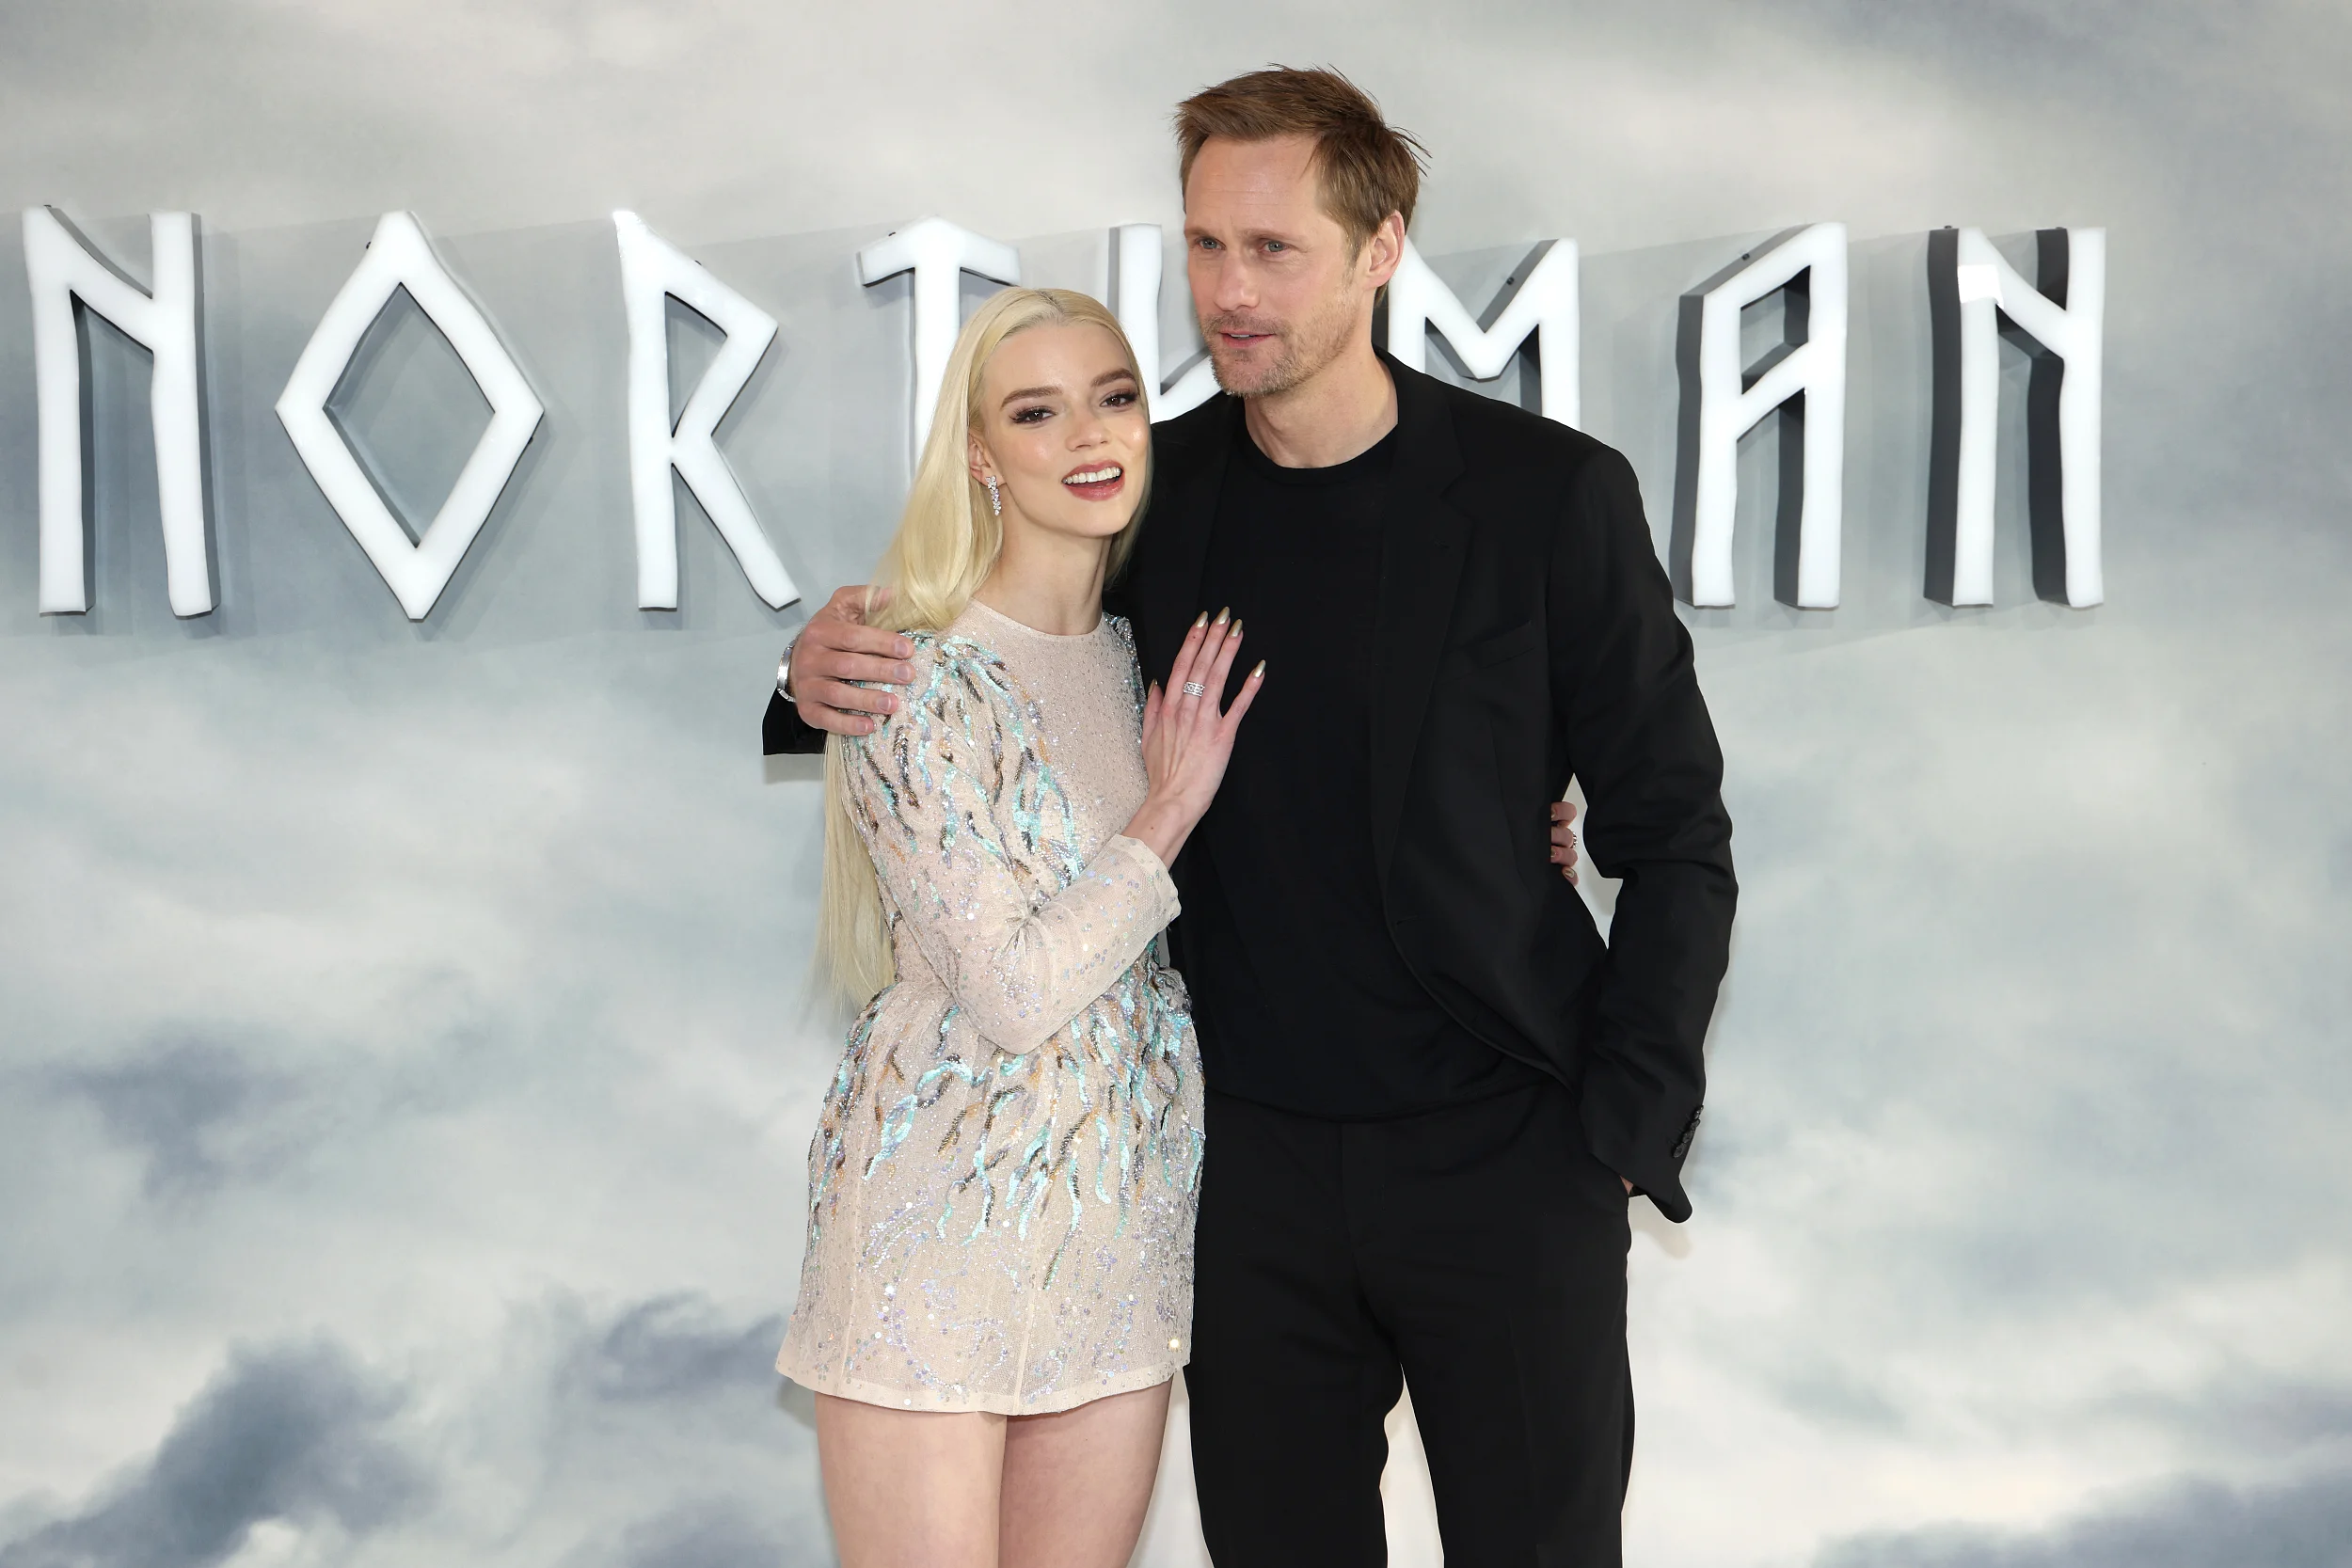 'The Northman' reveals character posters, Nicole Kidman and Anya Taylor-Joy attend its London premiere